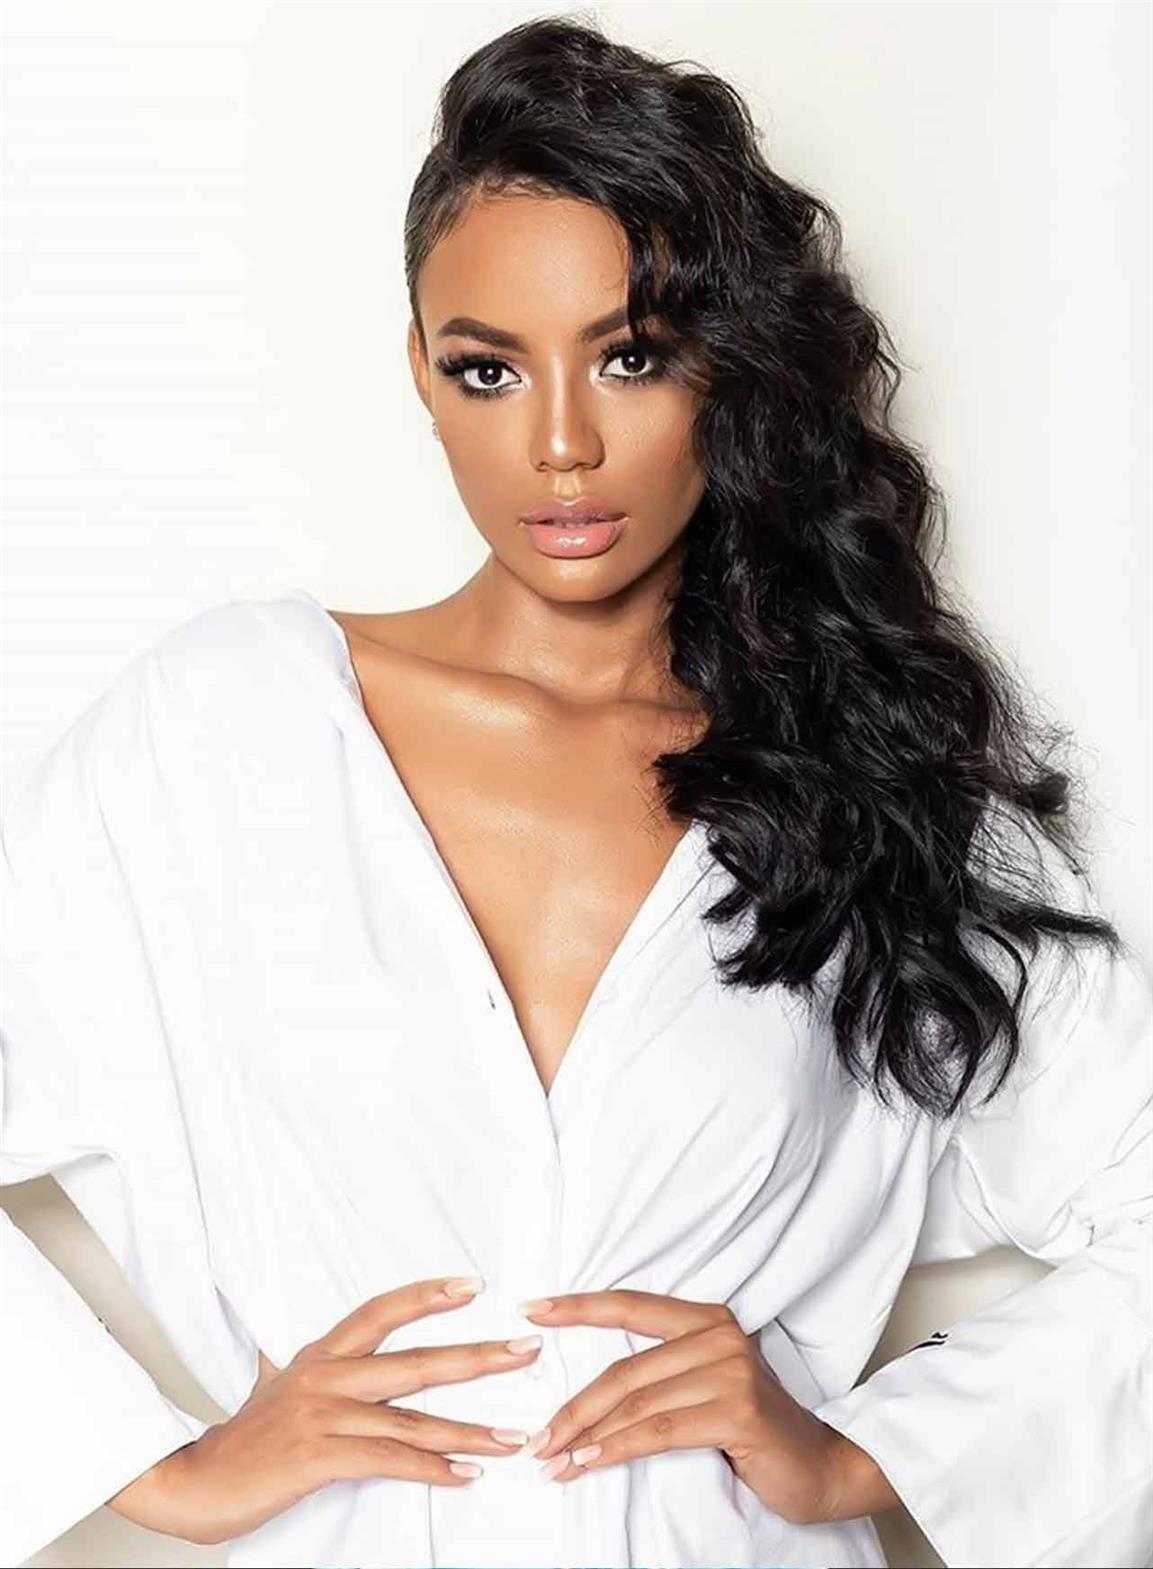 Kimberly Hooker Naranjo for Miss Grand Colombia 2020 crown?